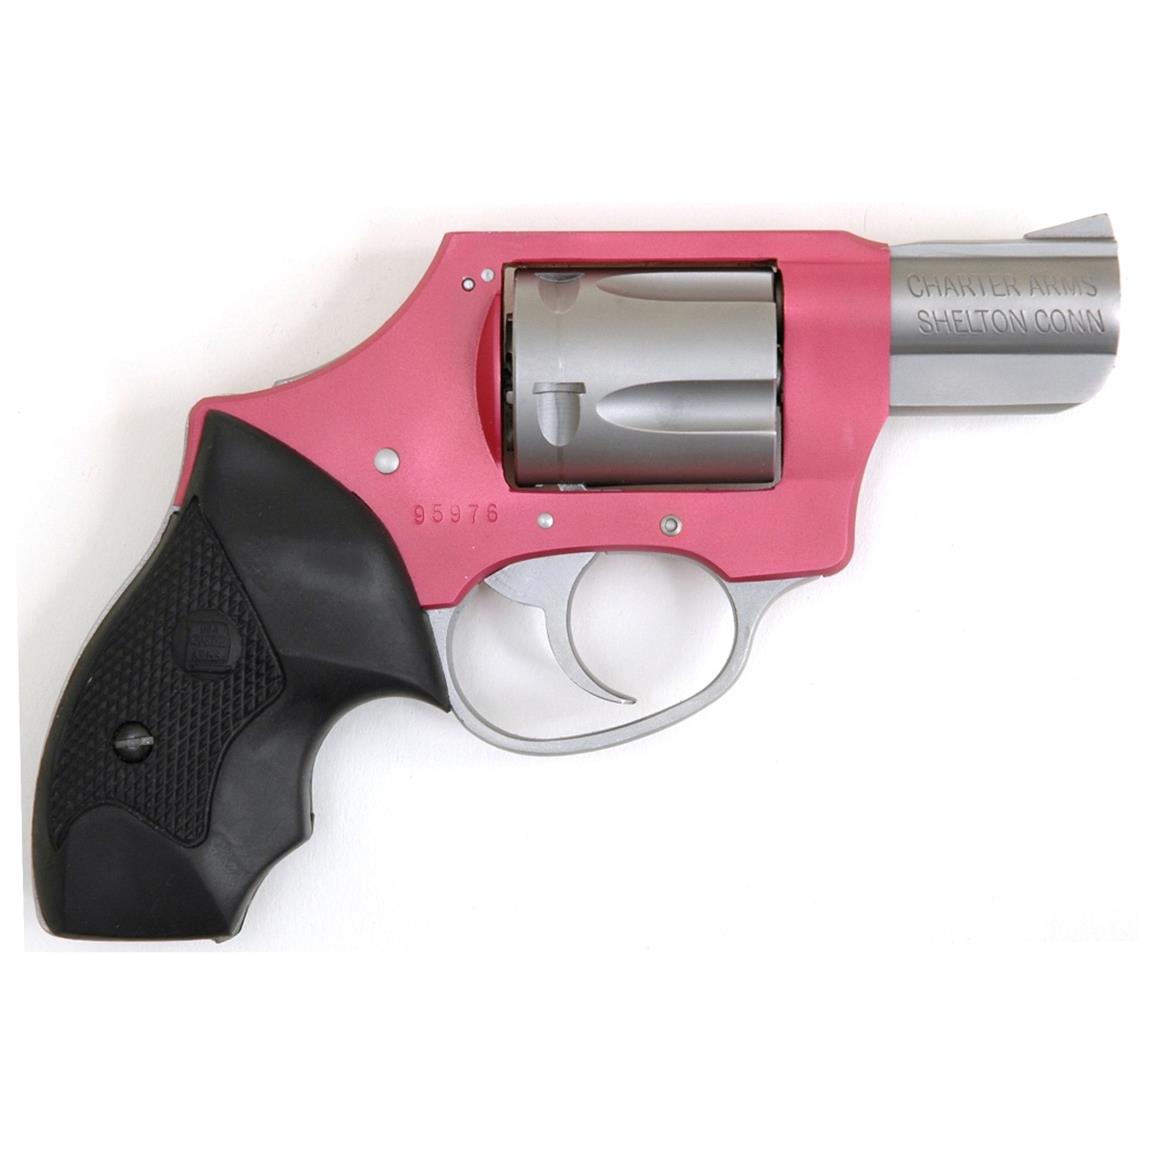 Charter Arms Pink Lady Undercover Lite, Revolver, .38 Special, 2" Barrel, 5 Rounds